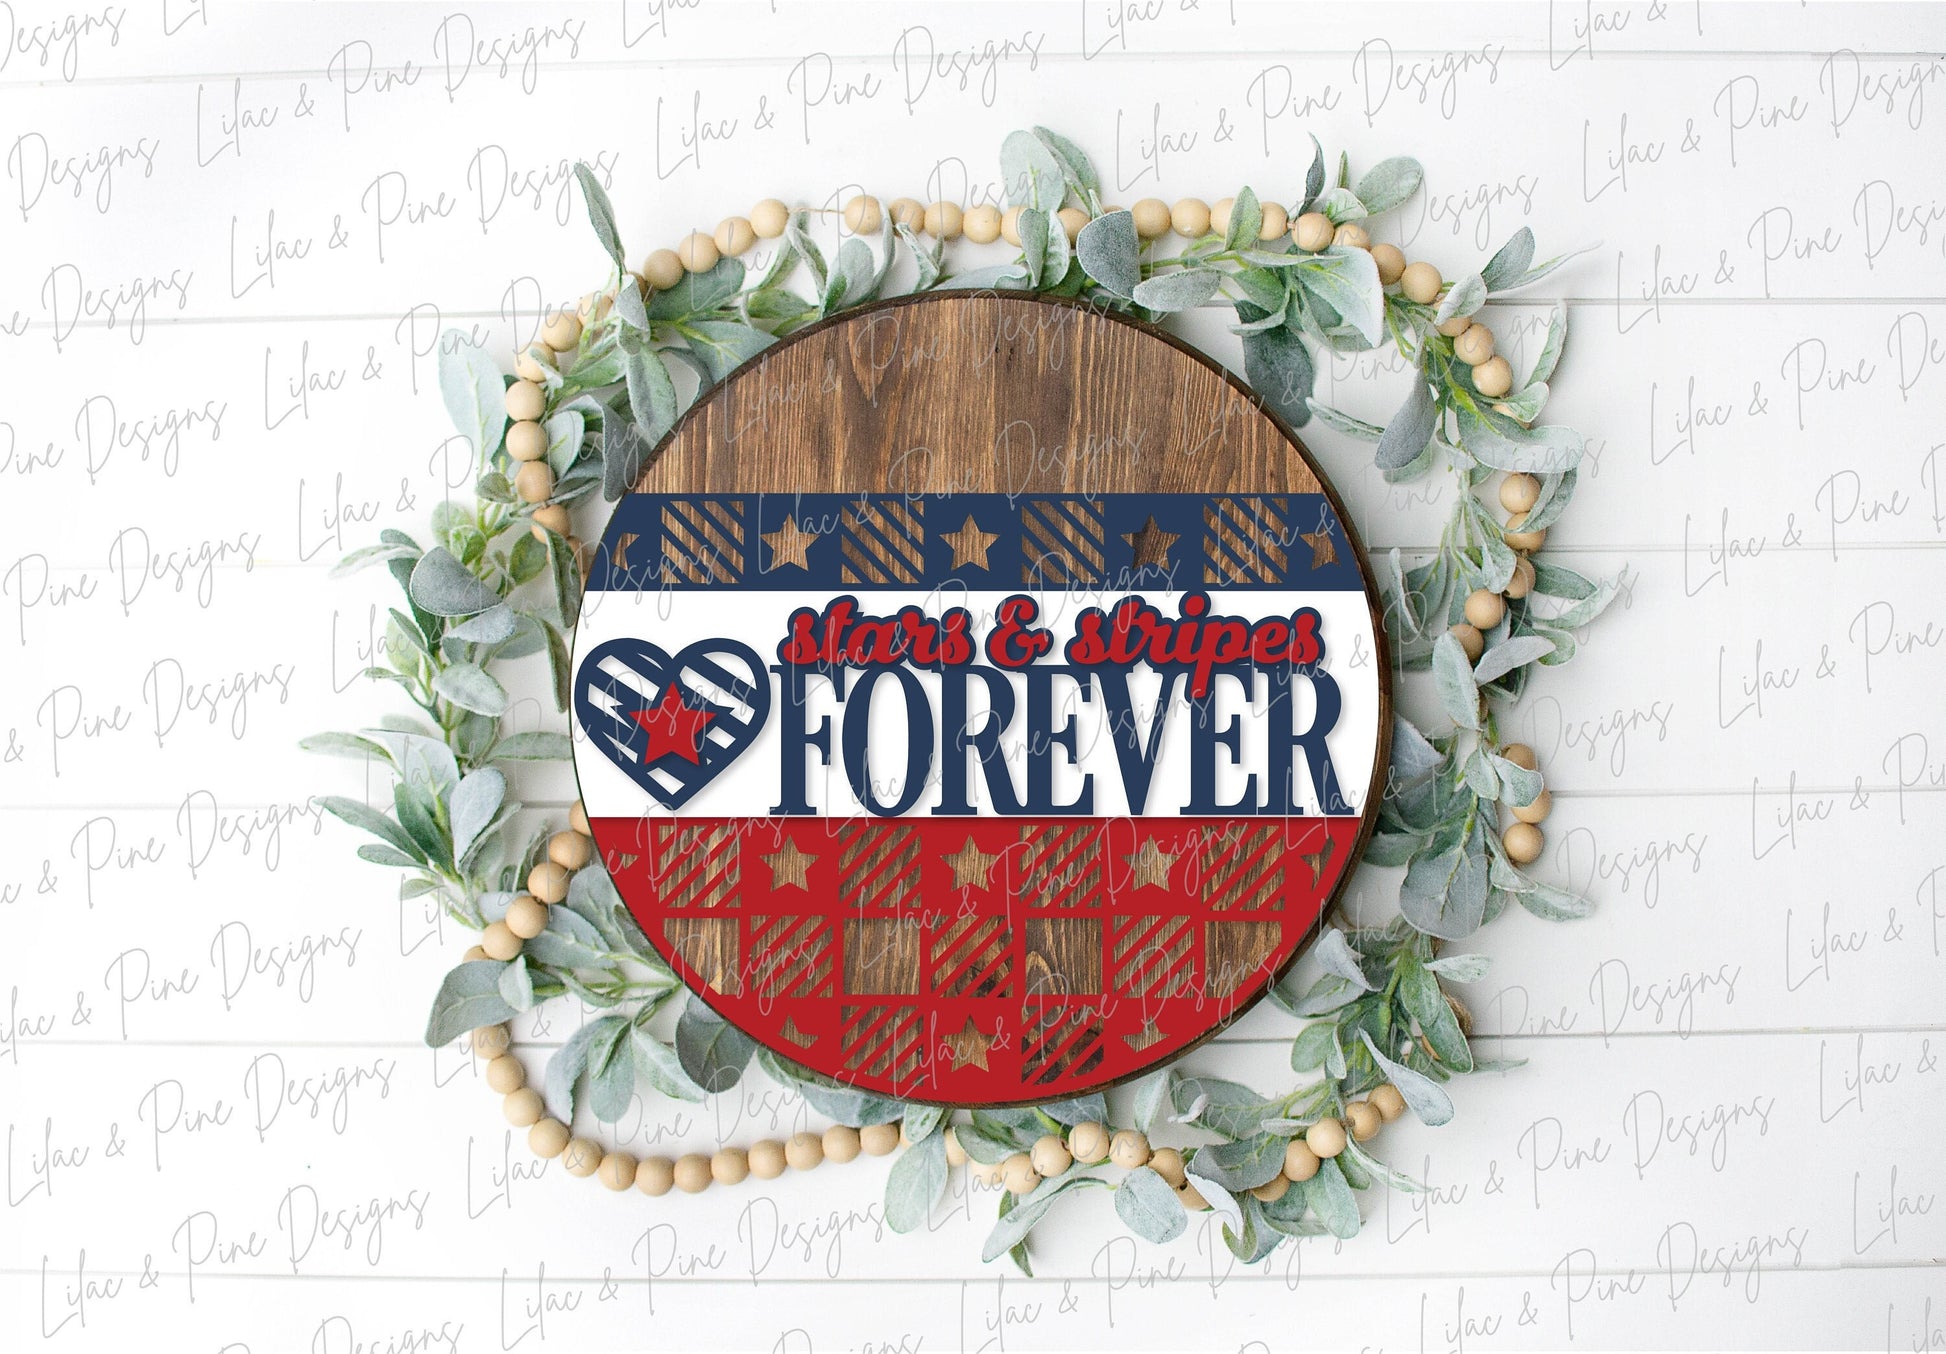 Stars and Stripes Forever Patriotic SVG Cut File